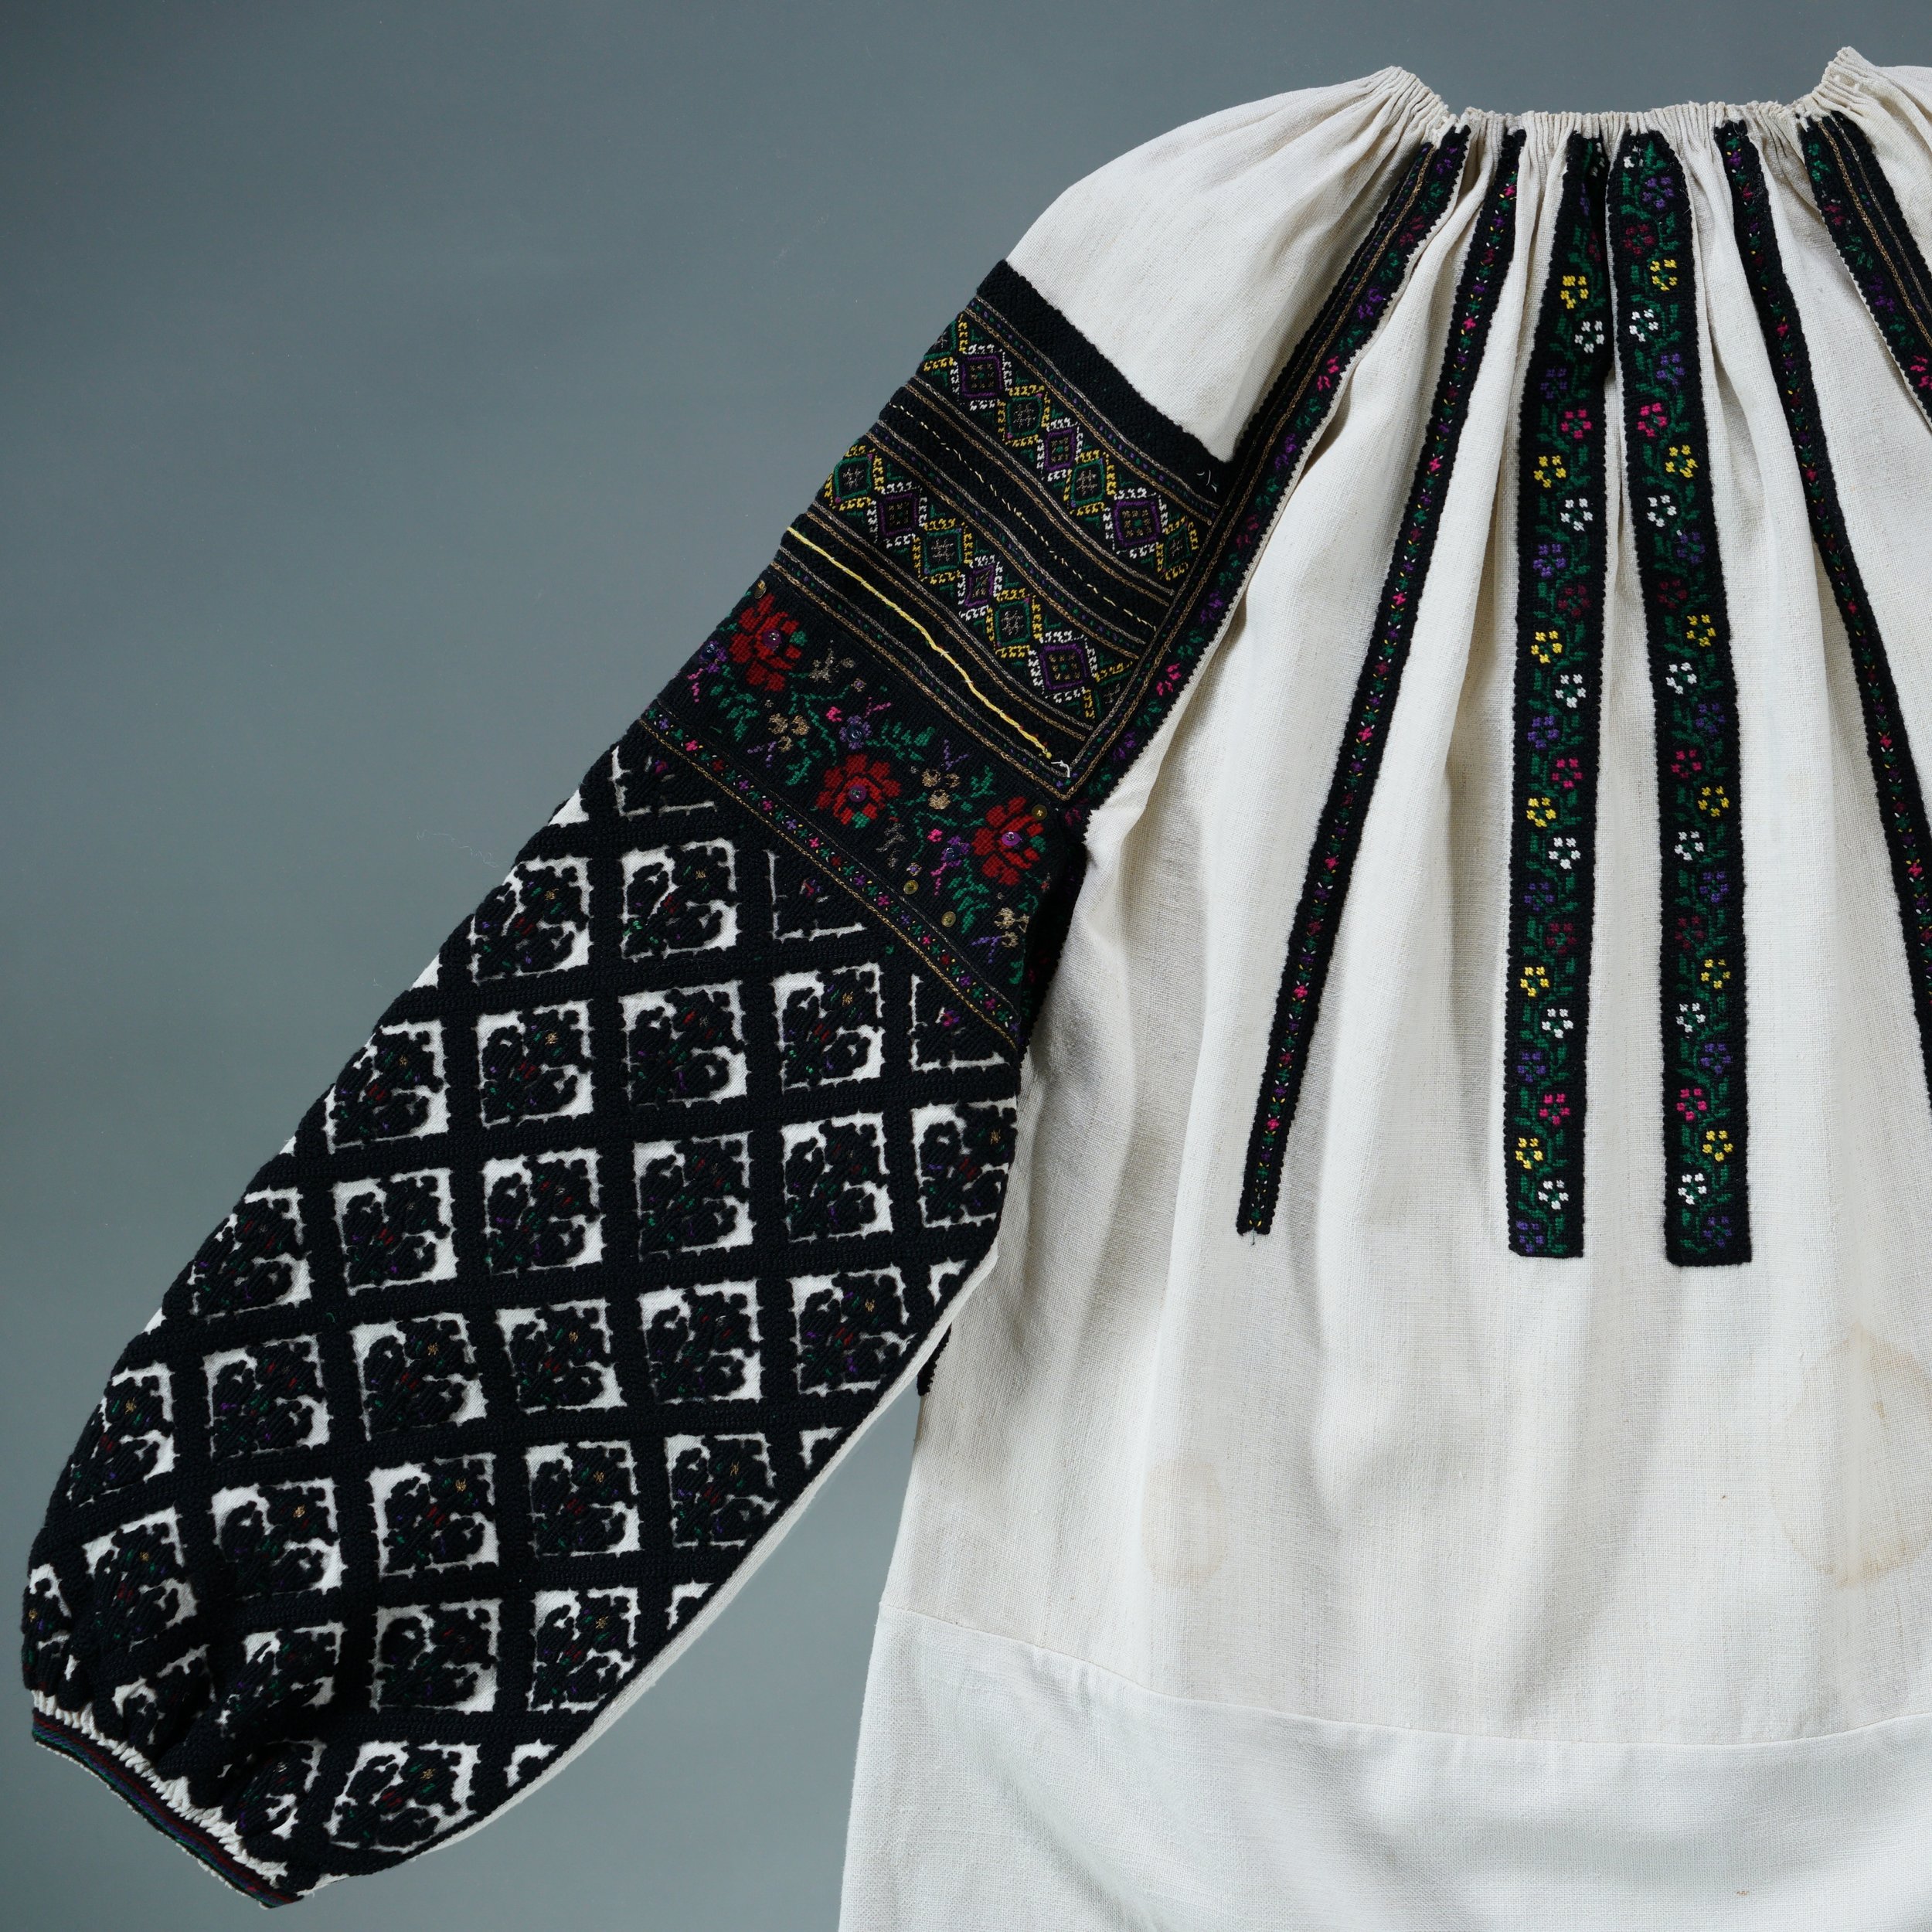 Happy Vyshyvanka Day! The third Thursday in May celebrates the Ukrainian embroidered shirt and culture! 
Here is a Borshchiv style women&rsquo;s shirt in the collection of the Ivan Honchar Museum in Kyiv, object КН-1186.
🇺🇦🕊️
____
#honcharmuseum #